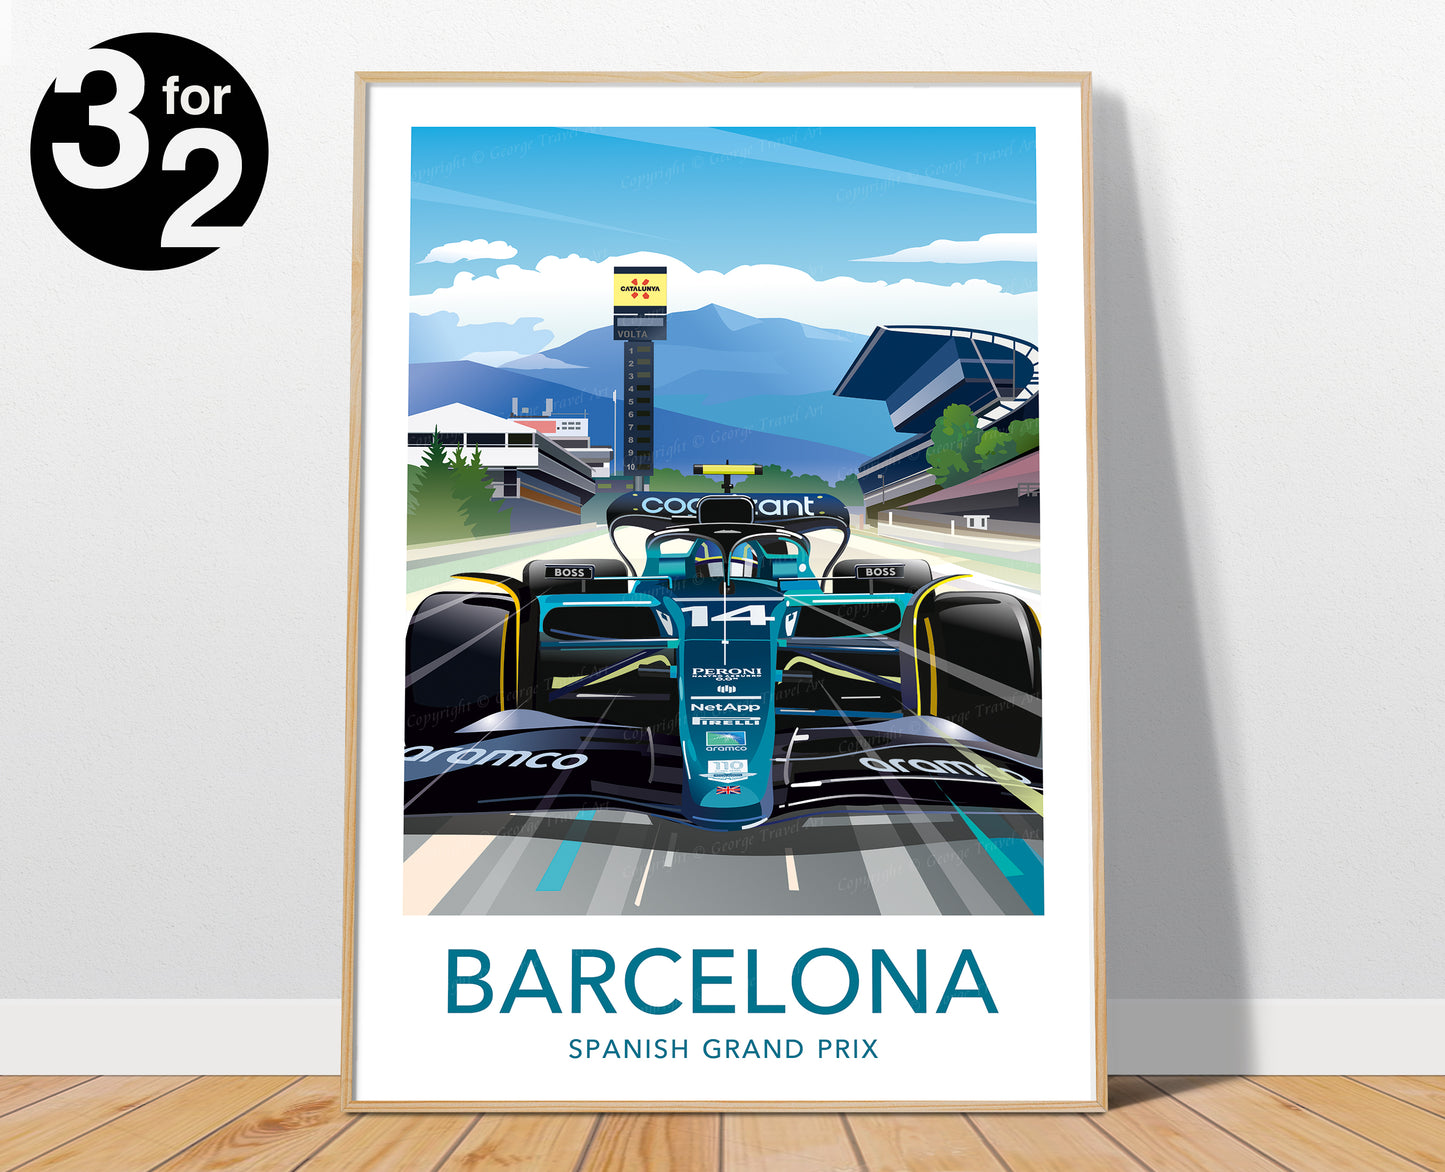 Barcelona F1 Spanish Grand Prix poster showing an Aston Martin race car on the track. The Catalan mountains are visible in the background of the print.